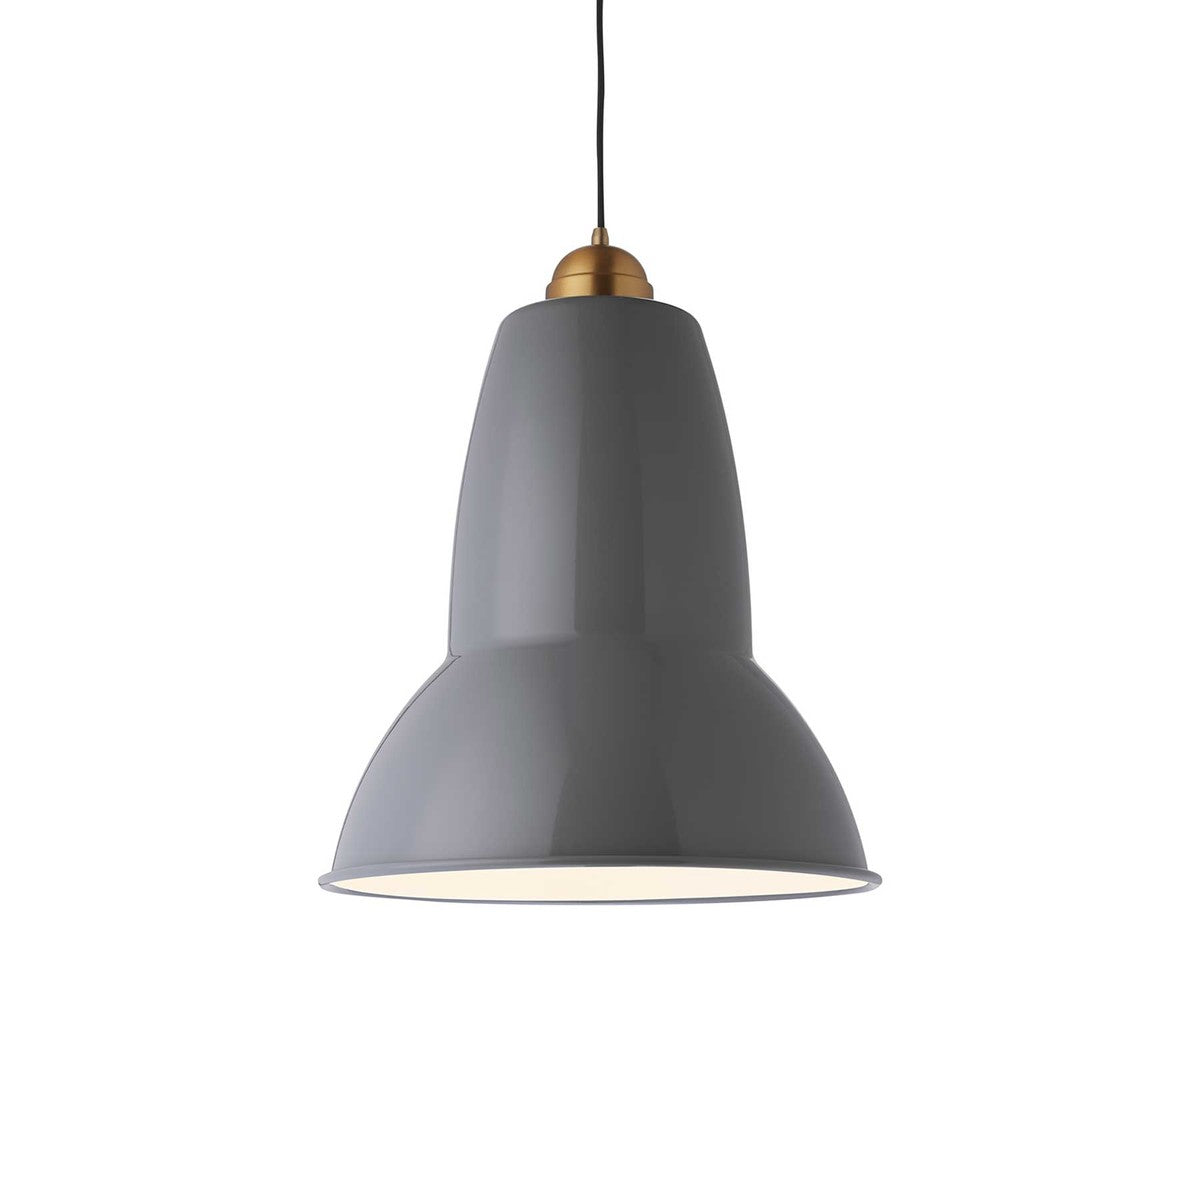 Anglepoise Giant 1227 pendant light in elephant grey with brass detail from Warehouse Home